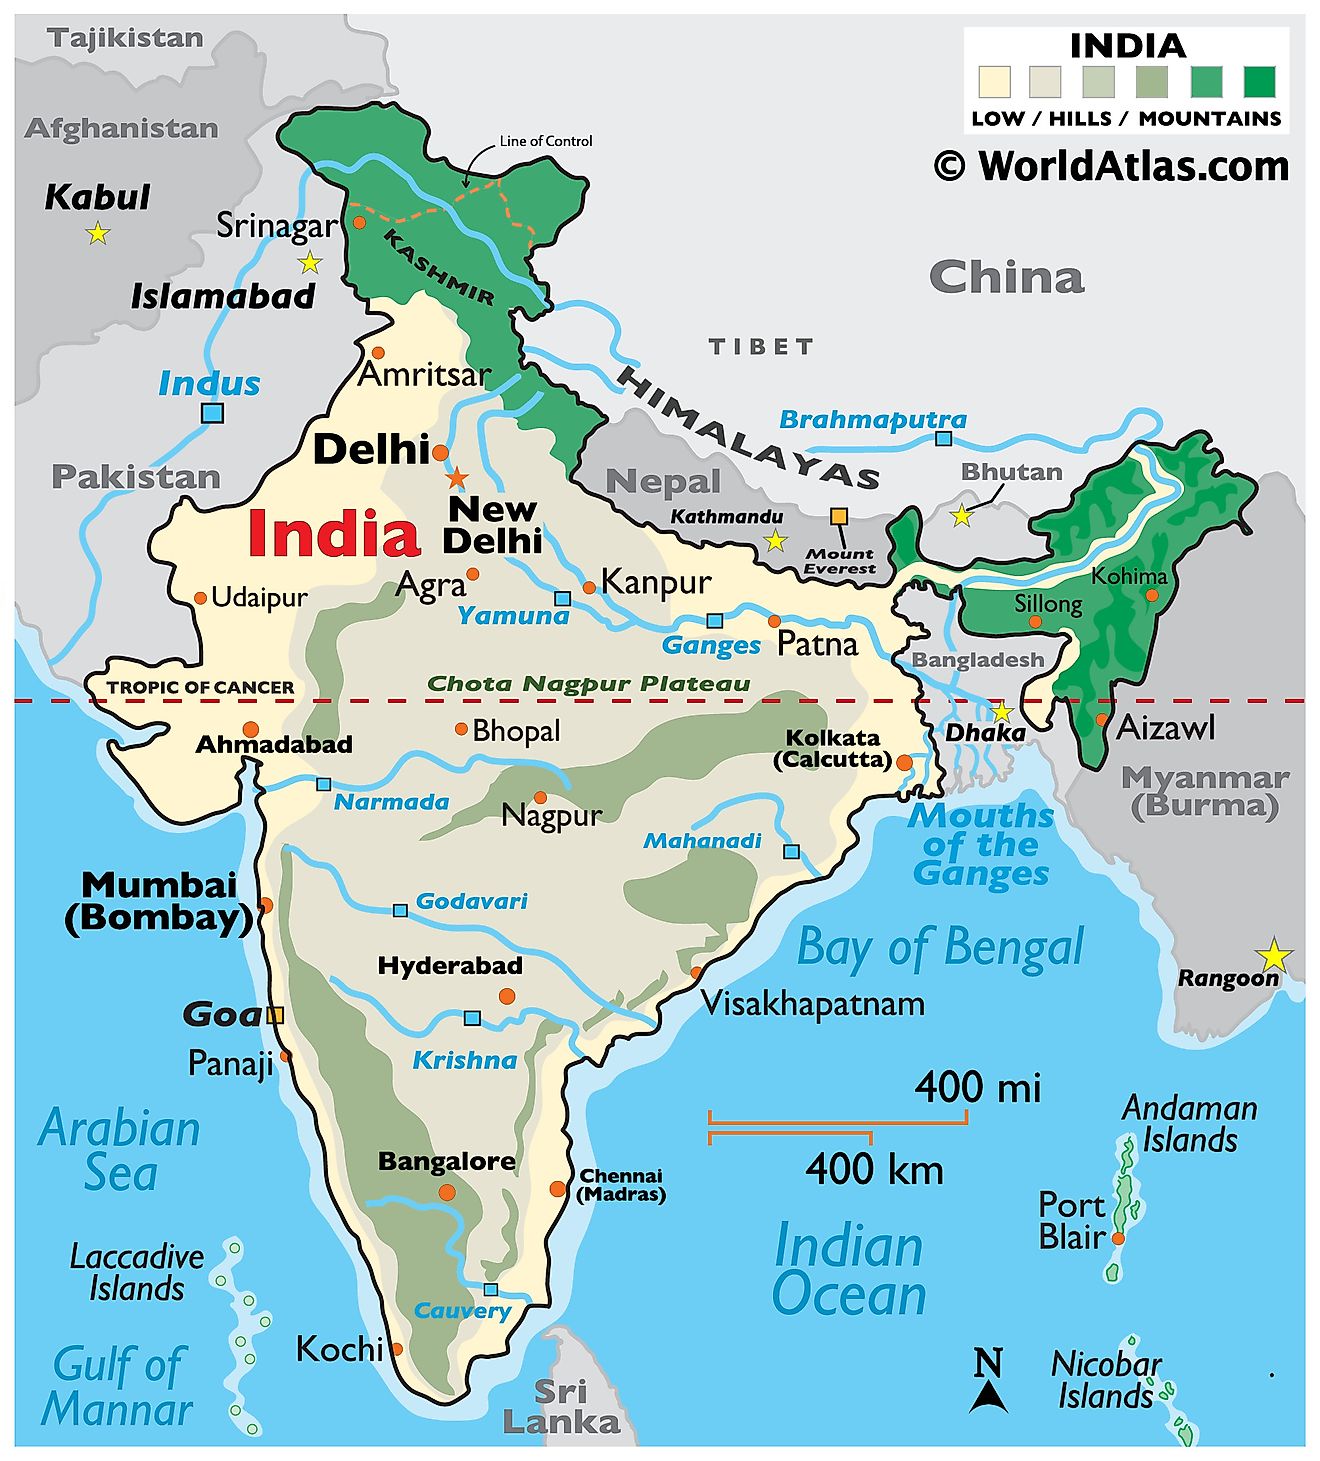 Physical map of India showing relief, mountain ranges, plateaus, major rivers, international borders, islands, important cities, and more.